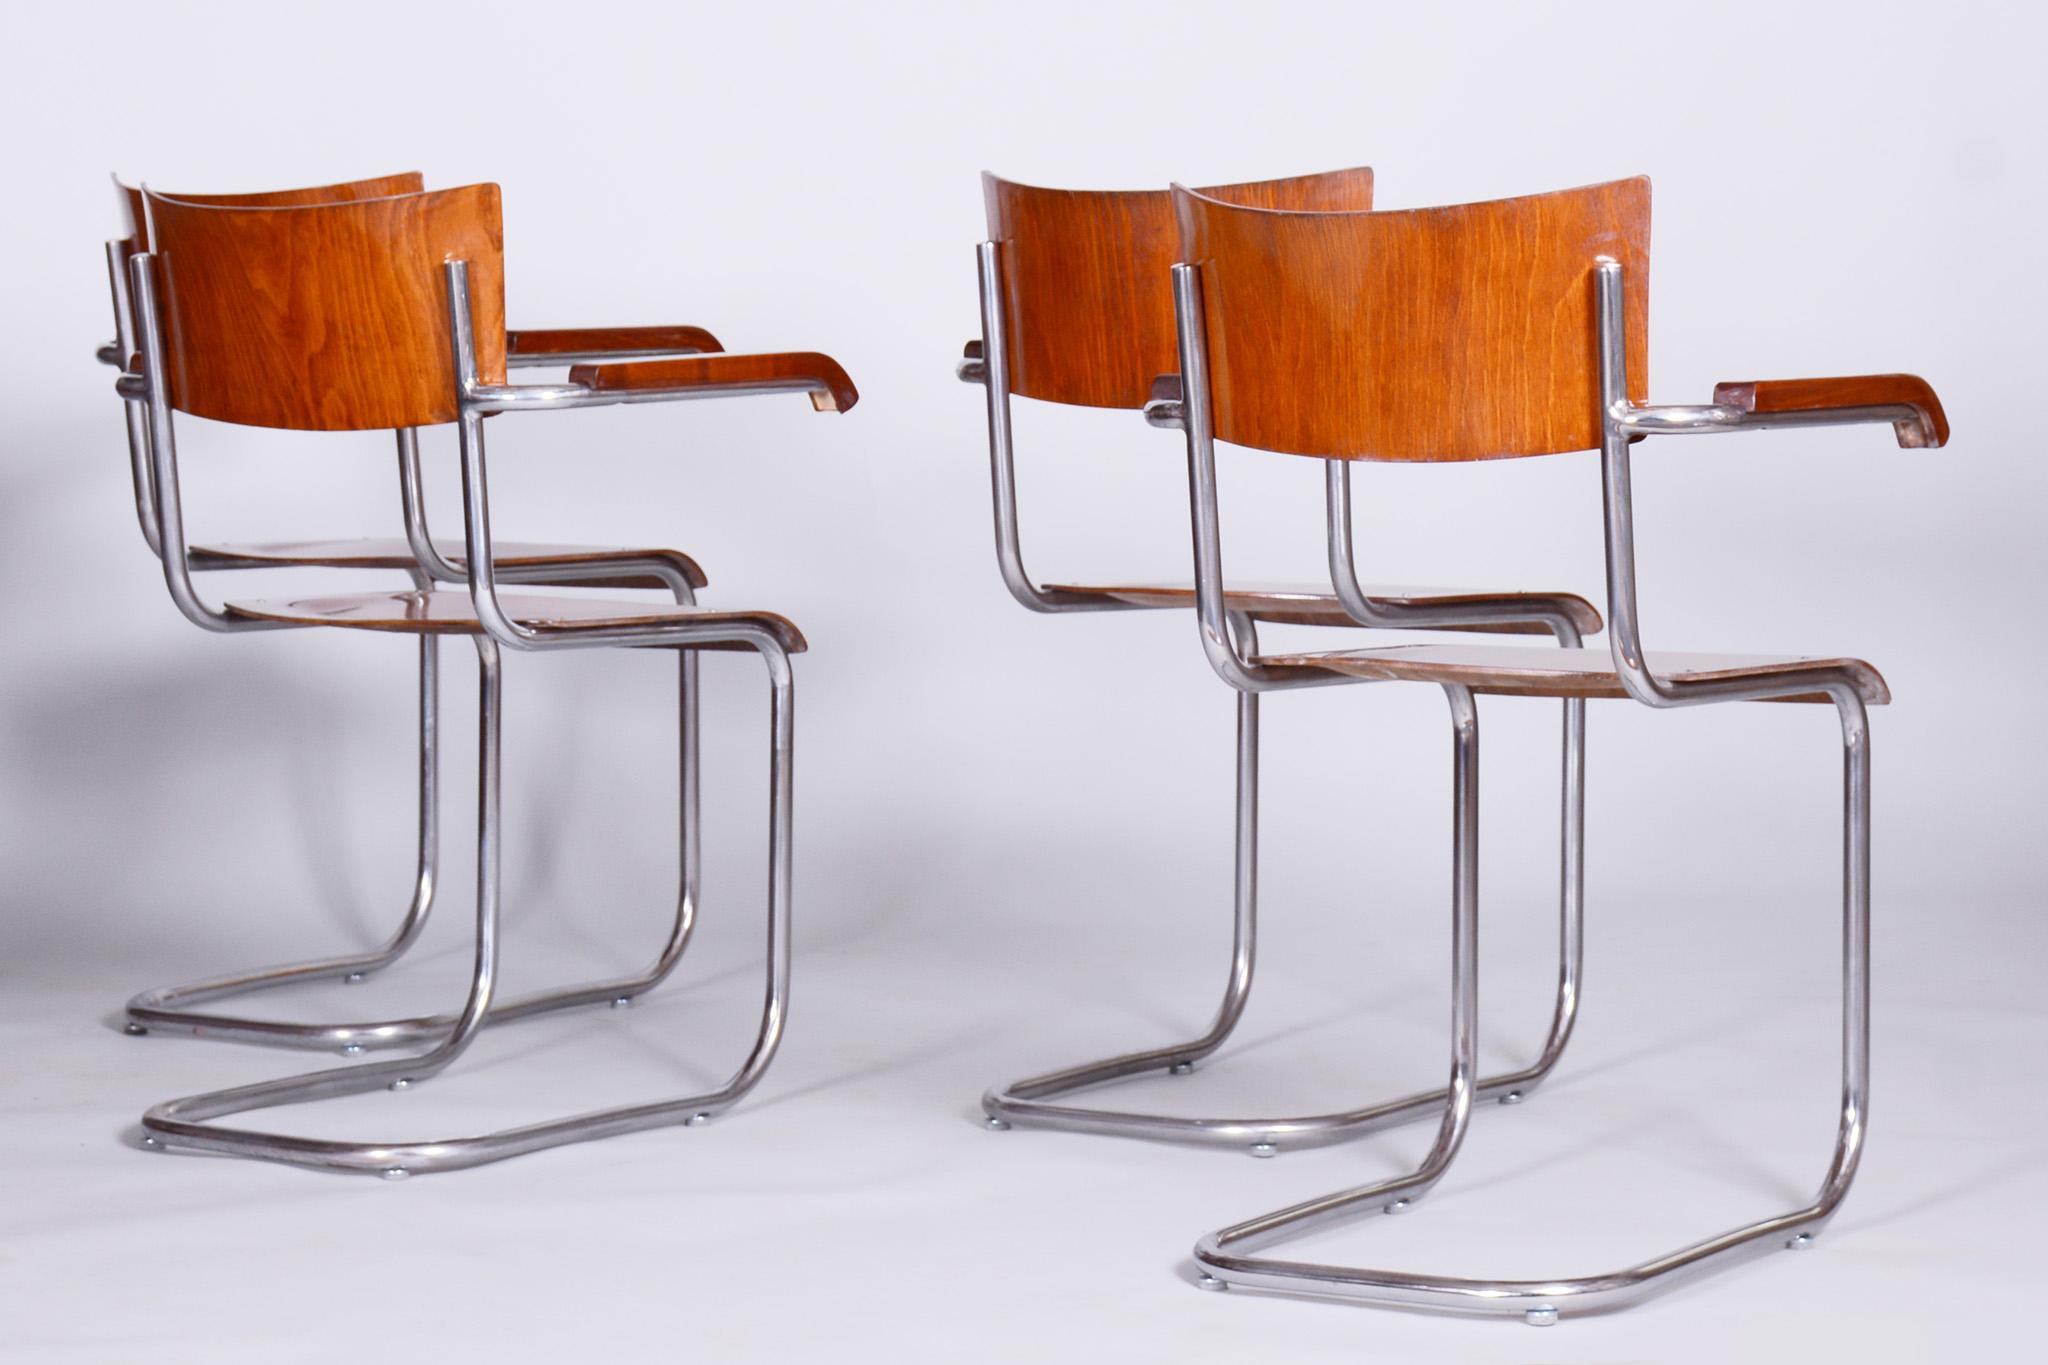 Set of 4 Restored Bauhaus Beech Armchairs Designed by Mart Stam, 1930s, Czechia For Sale 1